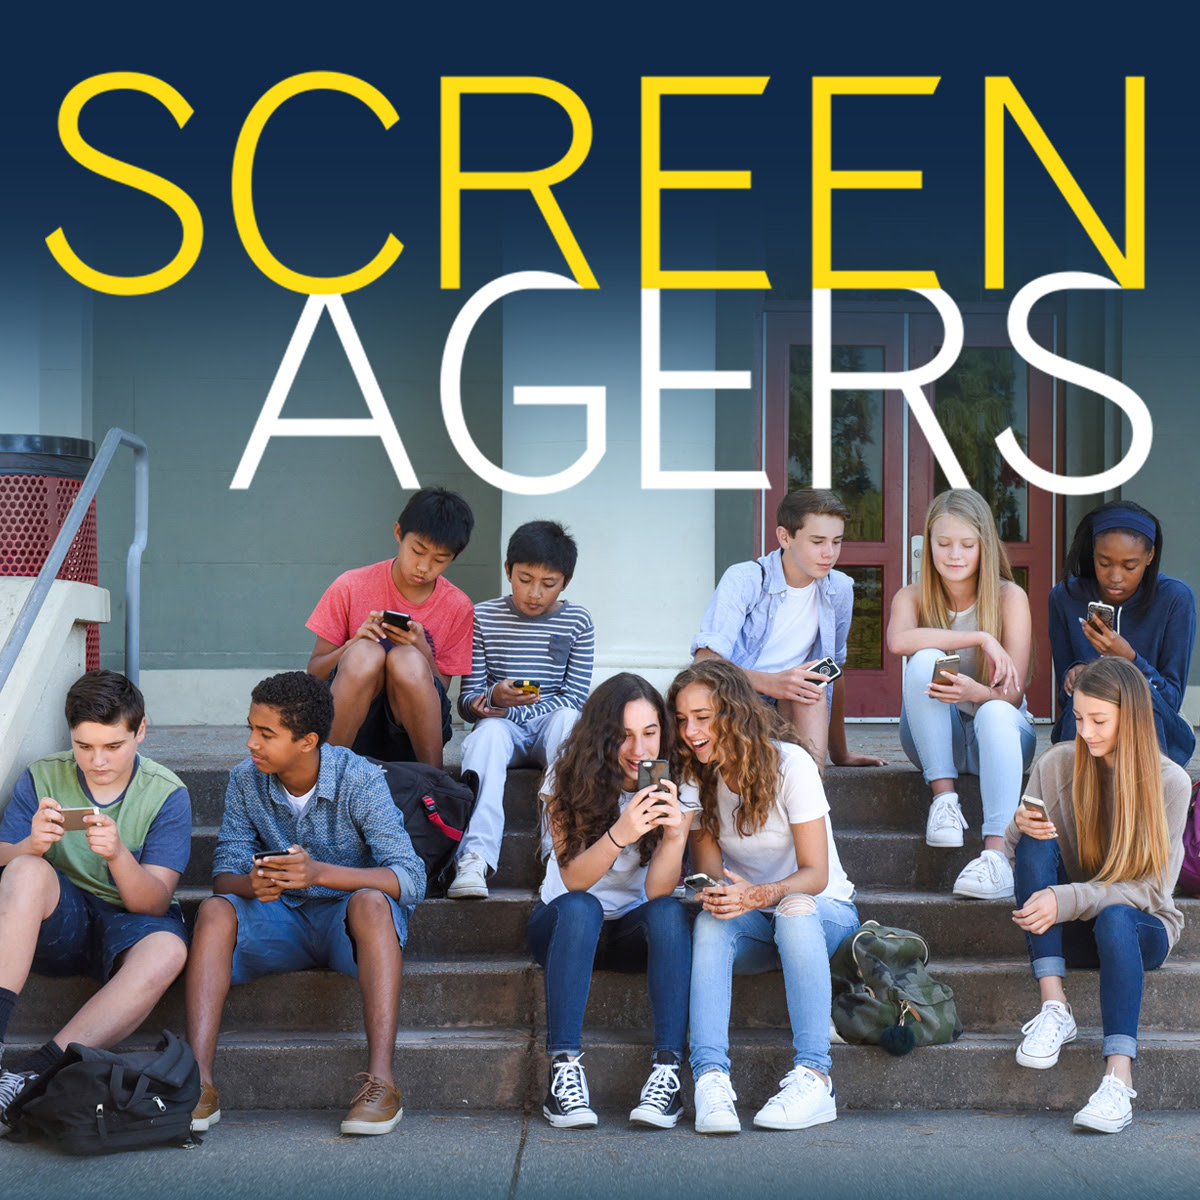 Screenagers Film Presented By ABC Head Start